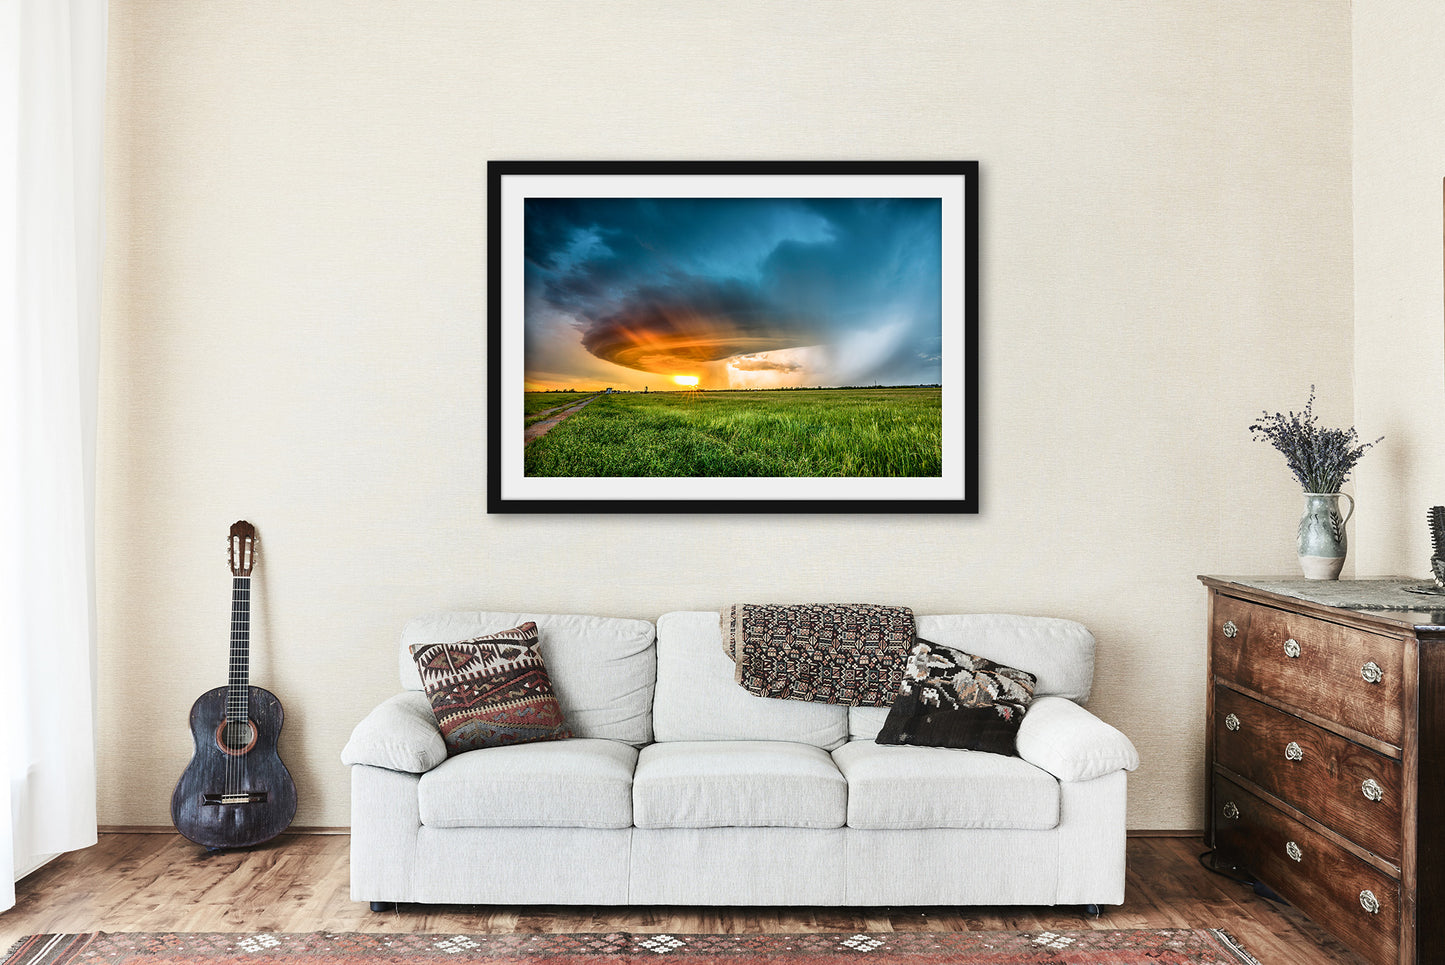 Supercell Thunderstorm at Sunset Framed Print | Storm Wall Art | Weather Picture | Oklahoma Photo | Nature Decor